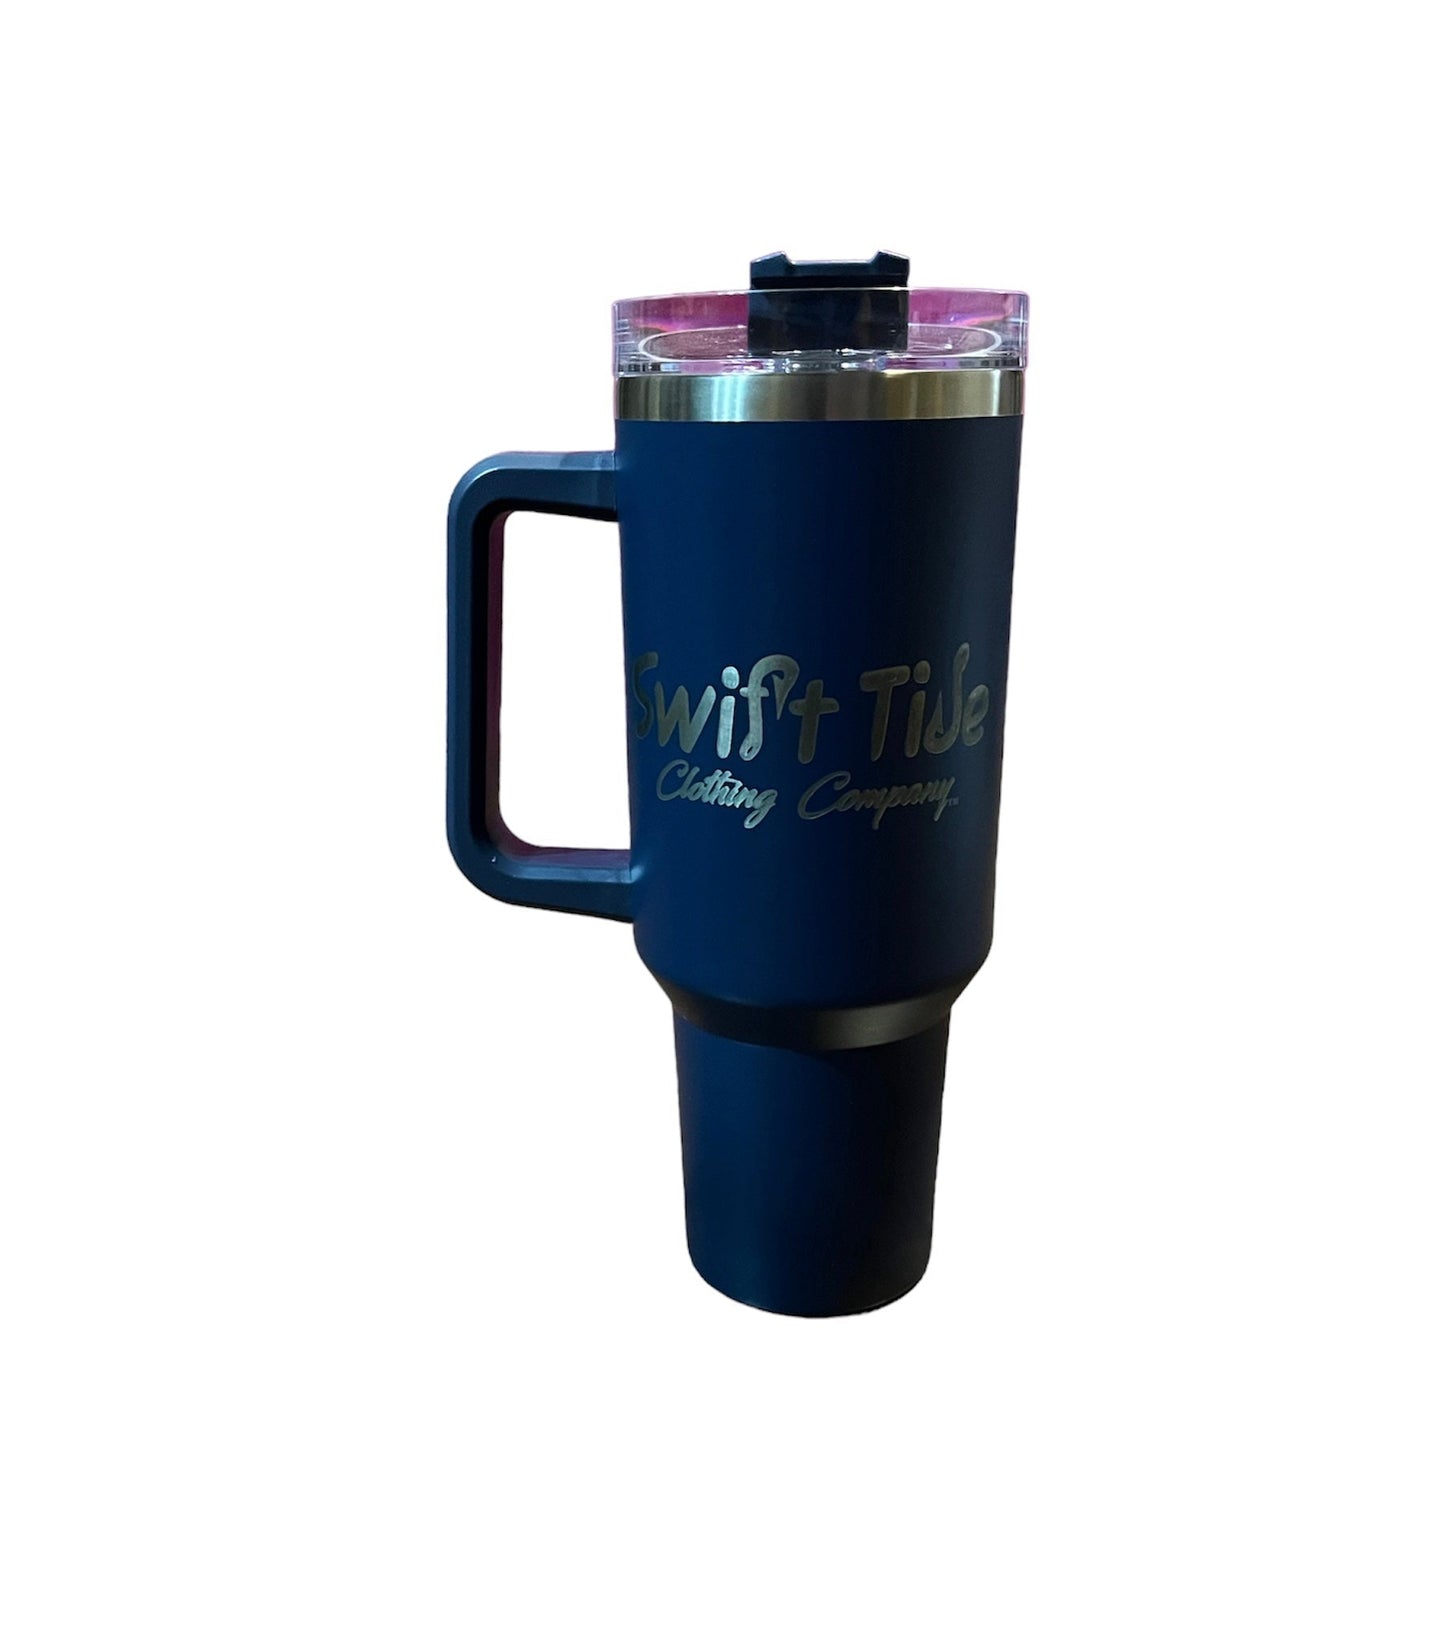 https://swifttideclothingcompany.com/cdn/shop/products/40oz-stainless-steel-tumblers-973656.jpg?v=1691888432&width=1445